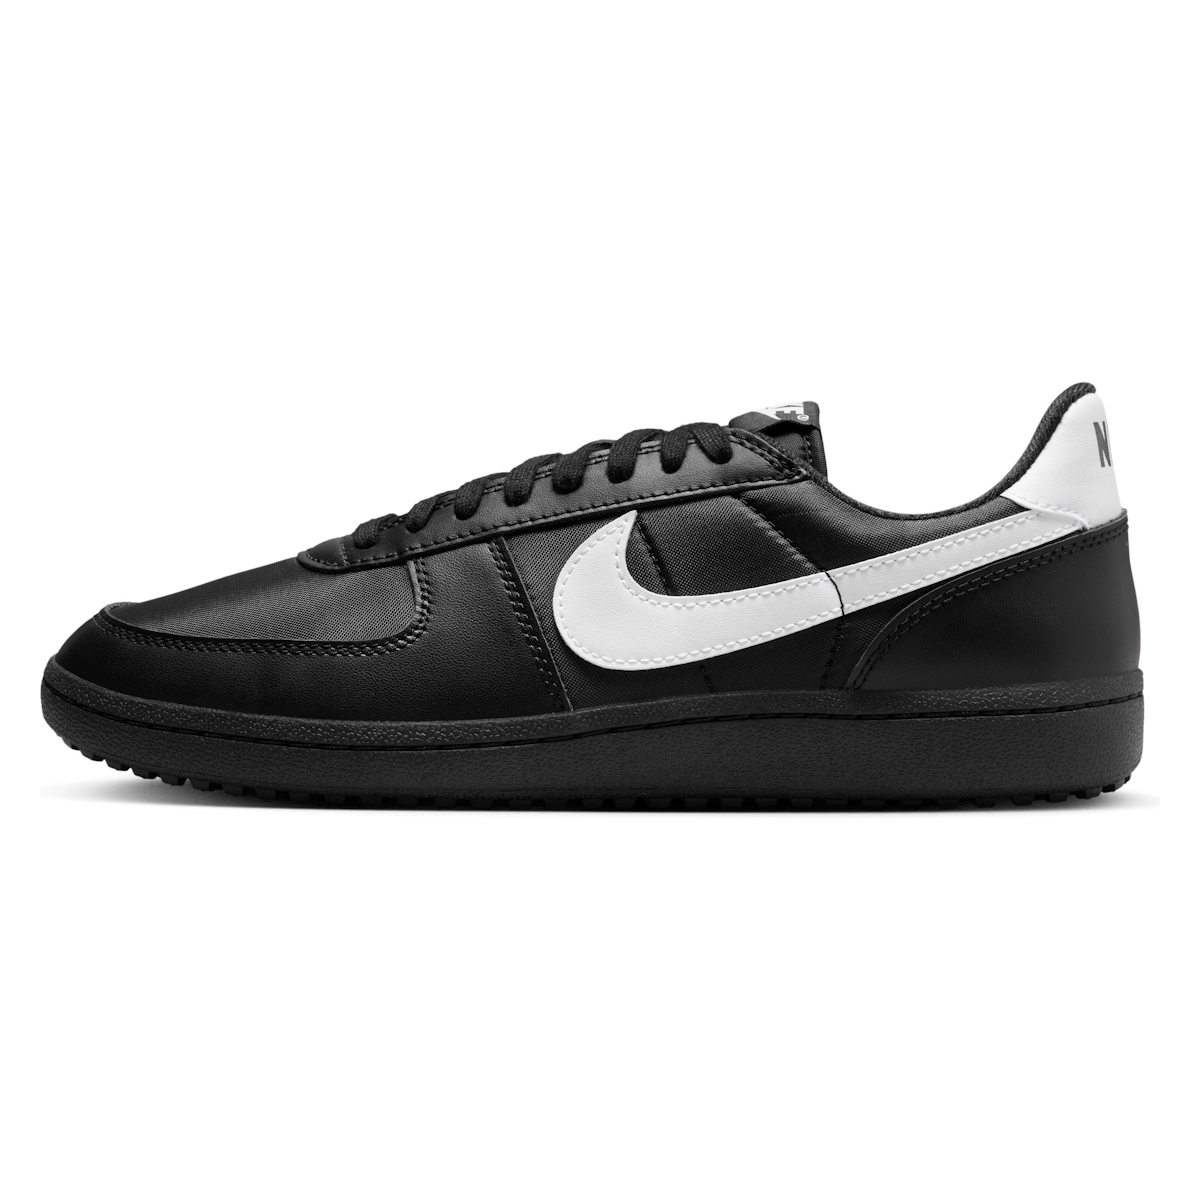 Nike Field General '82 "Black and White"